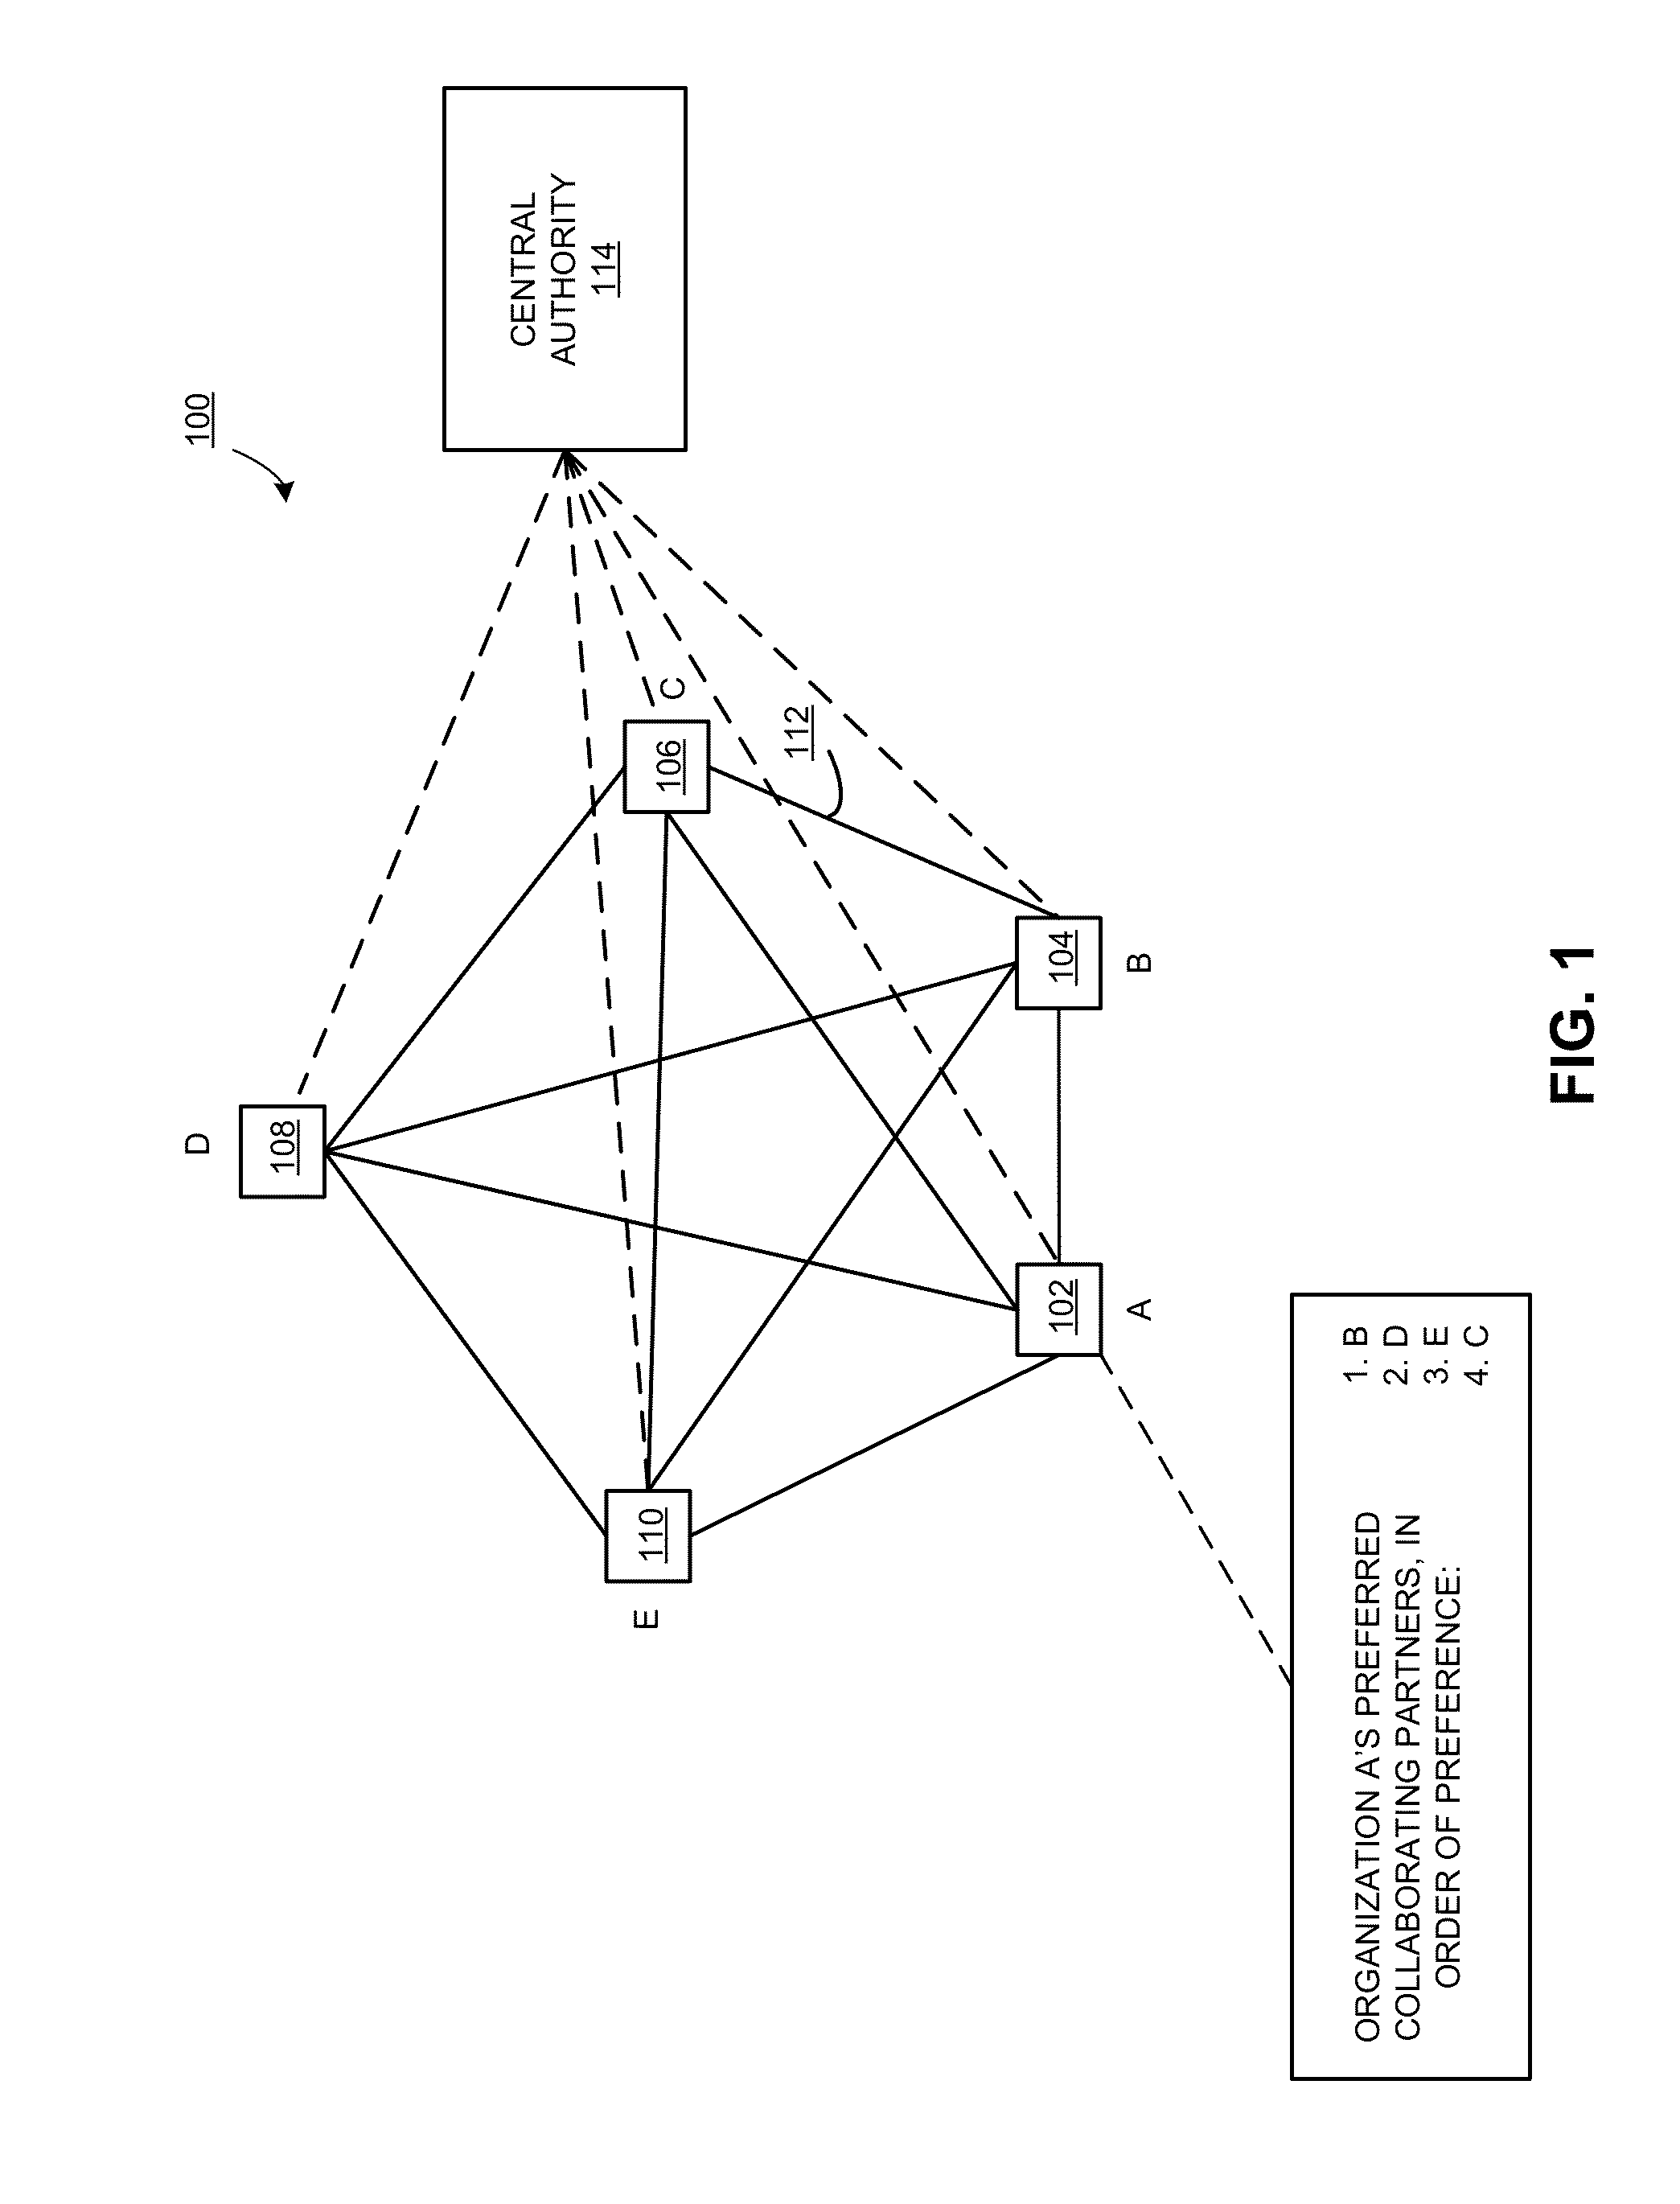 Methods for selection of collaborators for online threat mitigation